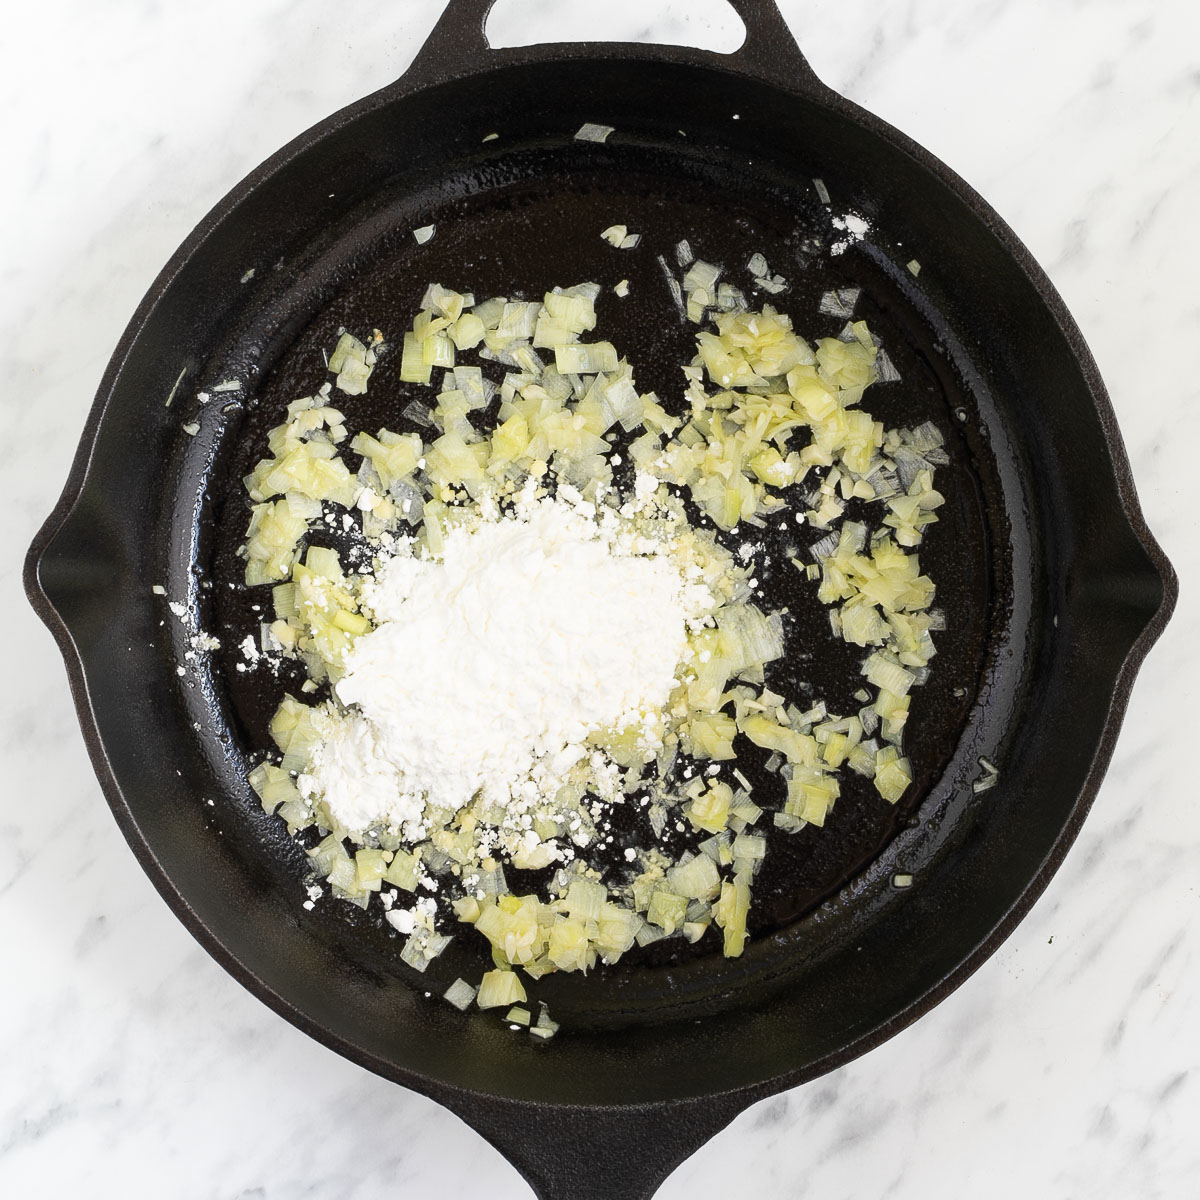 Black cast iron skillet with finely chopped onion and garlic.